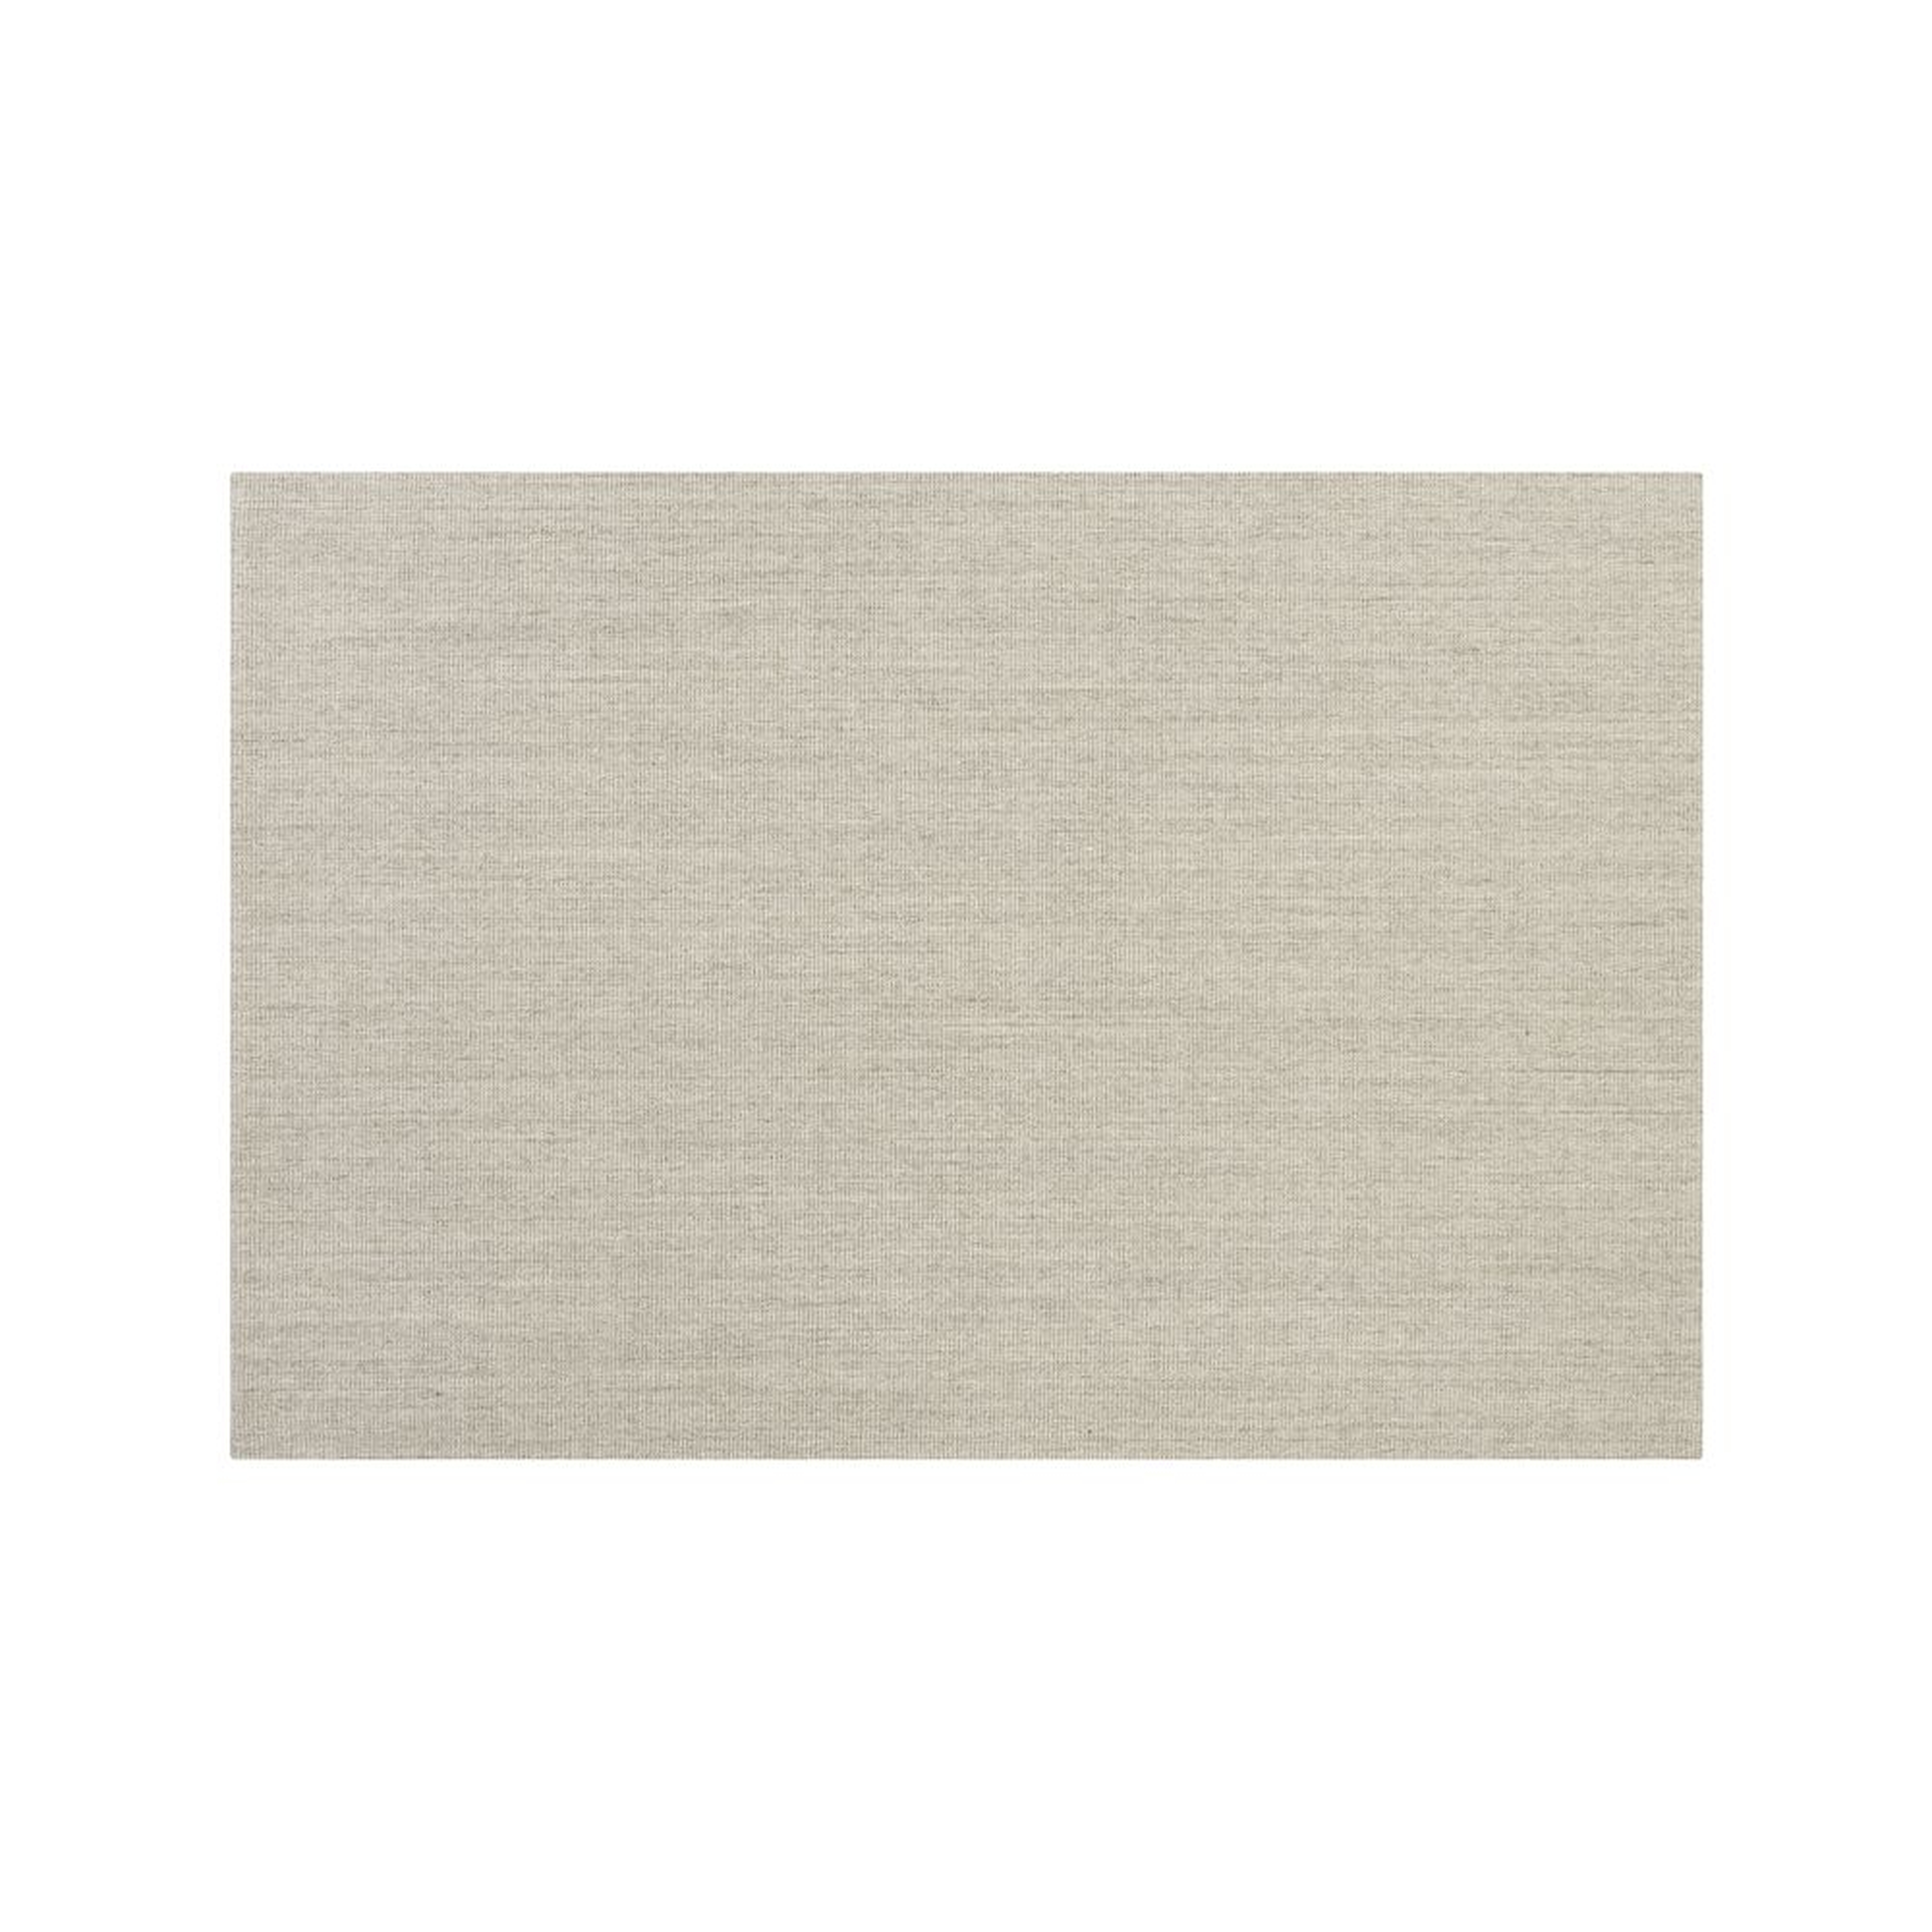 Sisal Linen 8'x10' Area Rug - Crate and Barrel